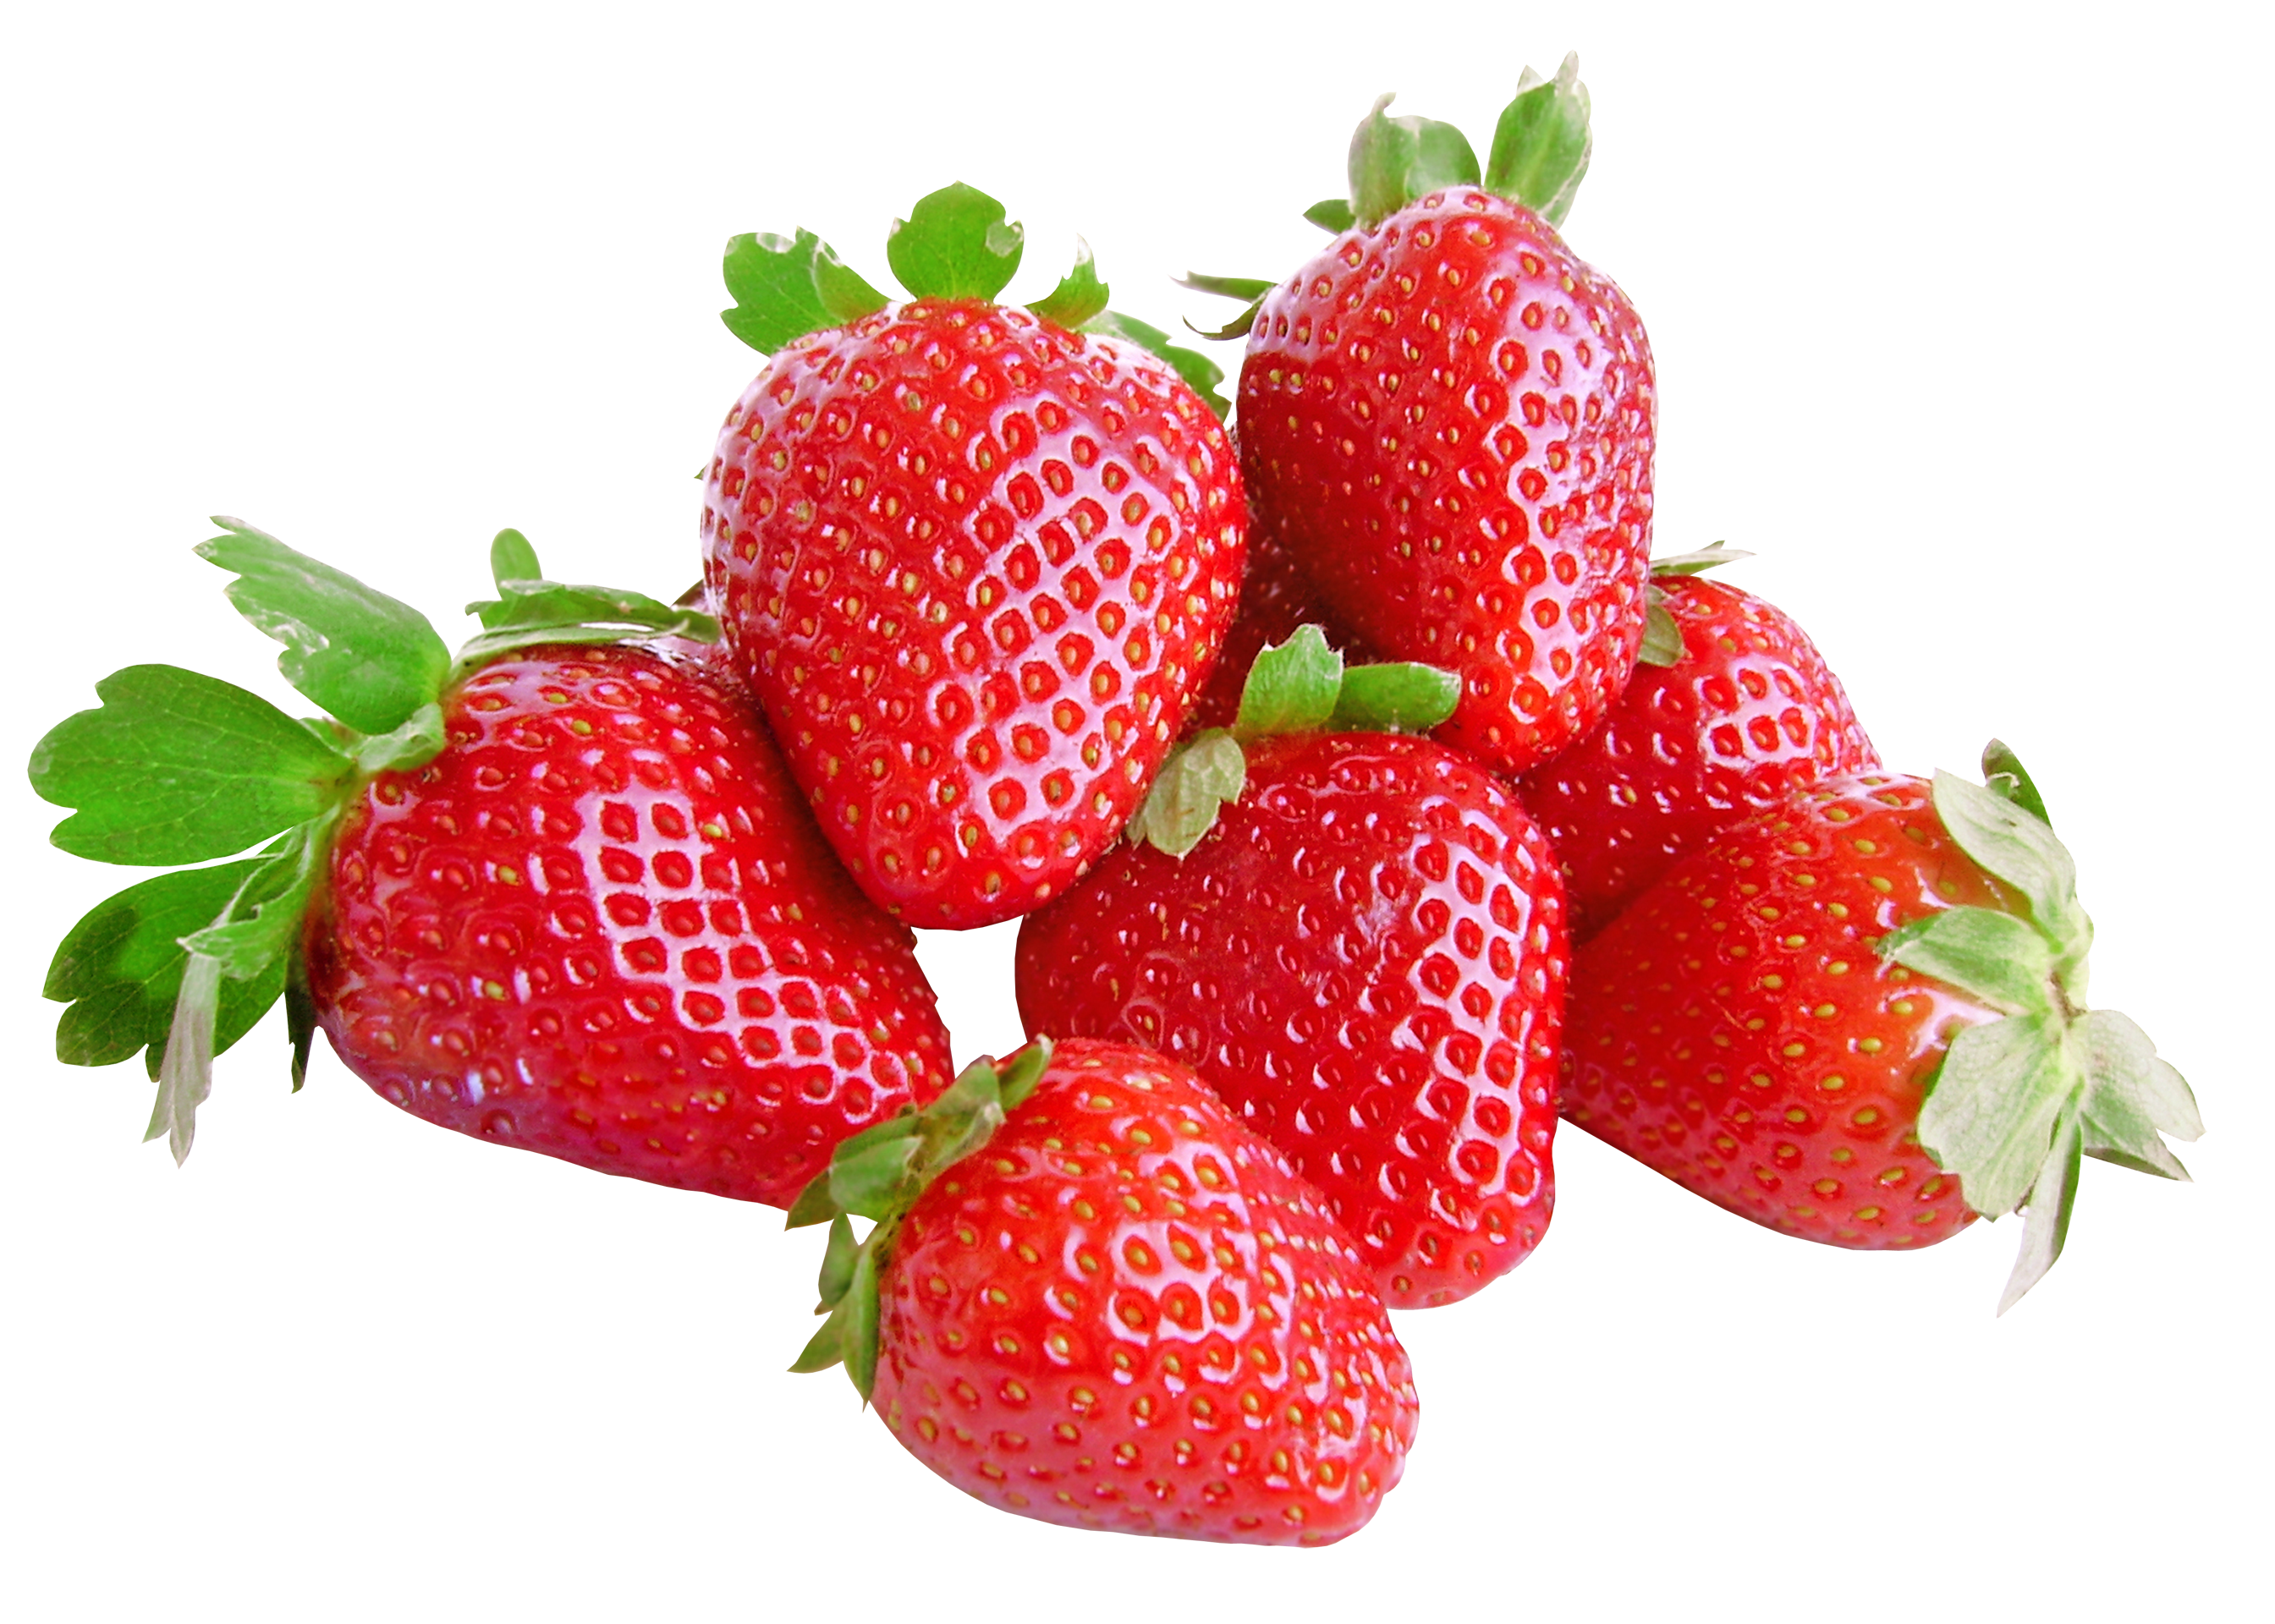 Strawberry Pics, Food Collection